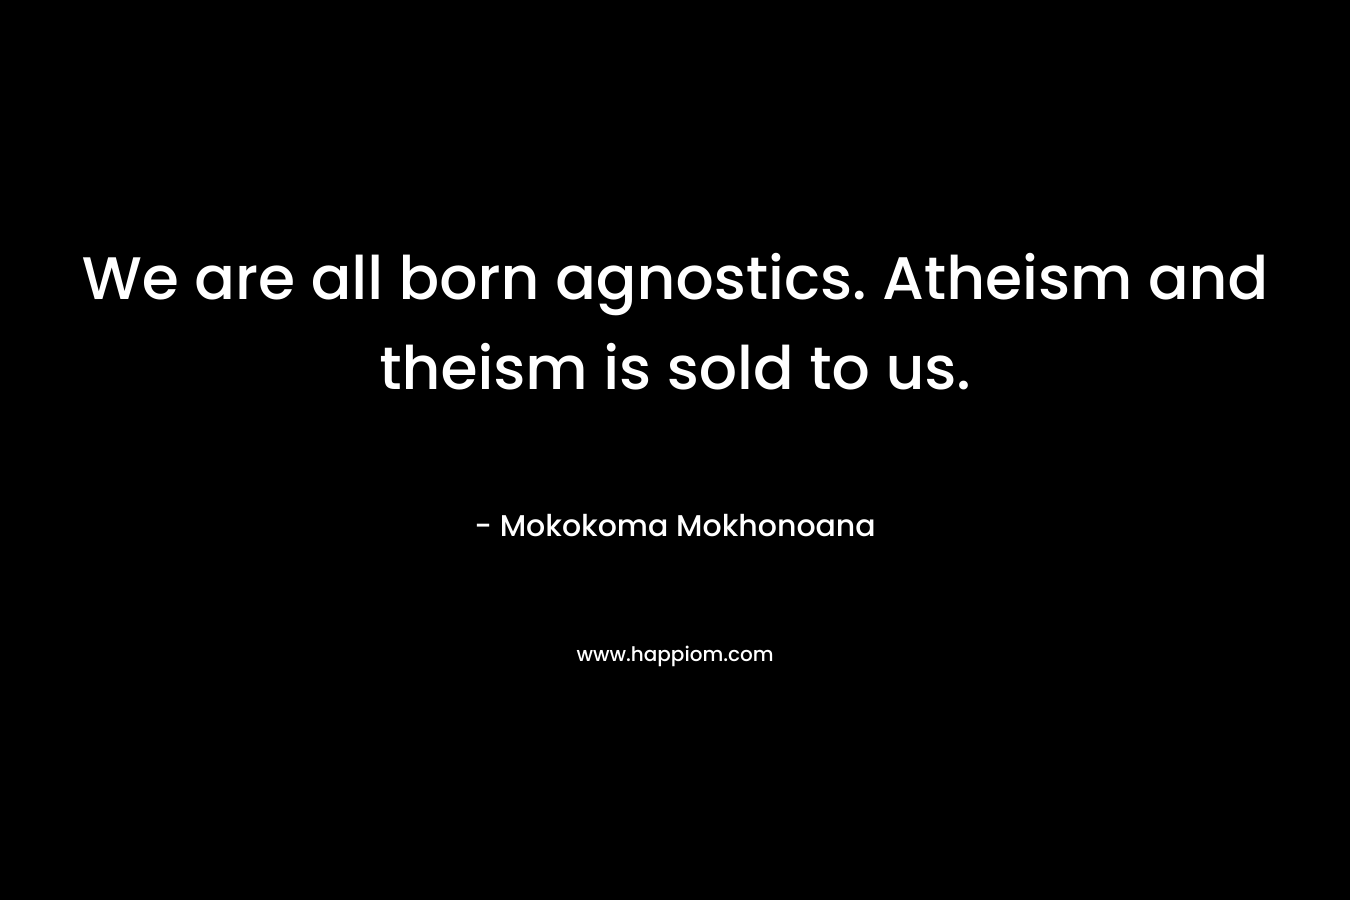 We are all born agnostics. Atheism and theism is sold to us. – Mokokoma Mokhonoana